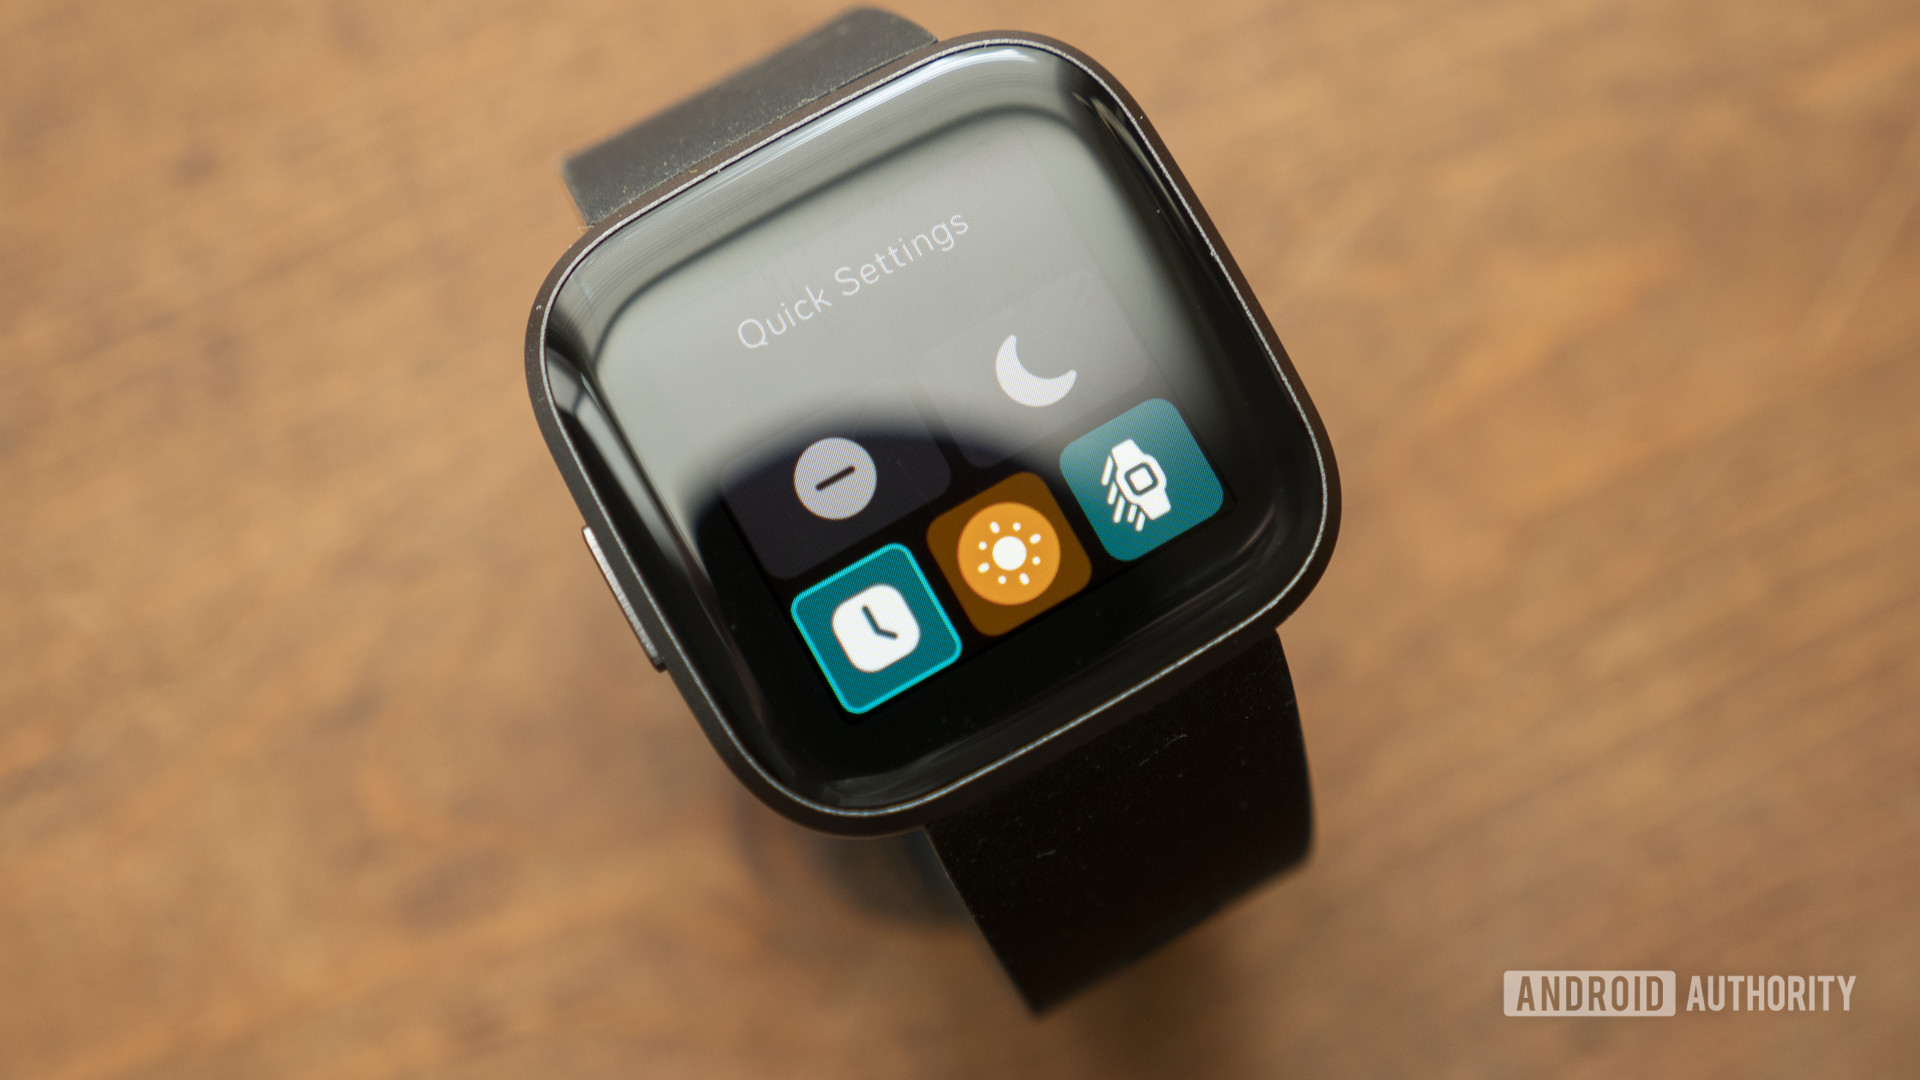 fitbit versa 2 review quick settings control center